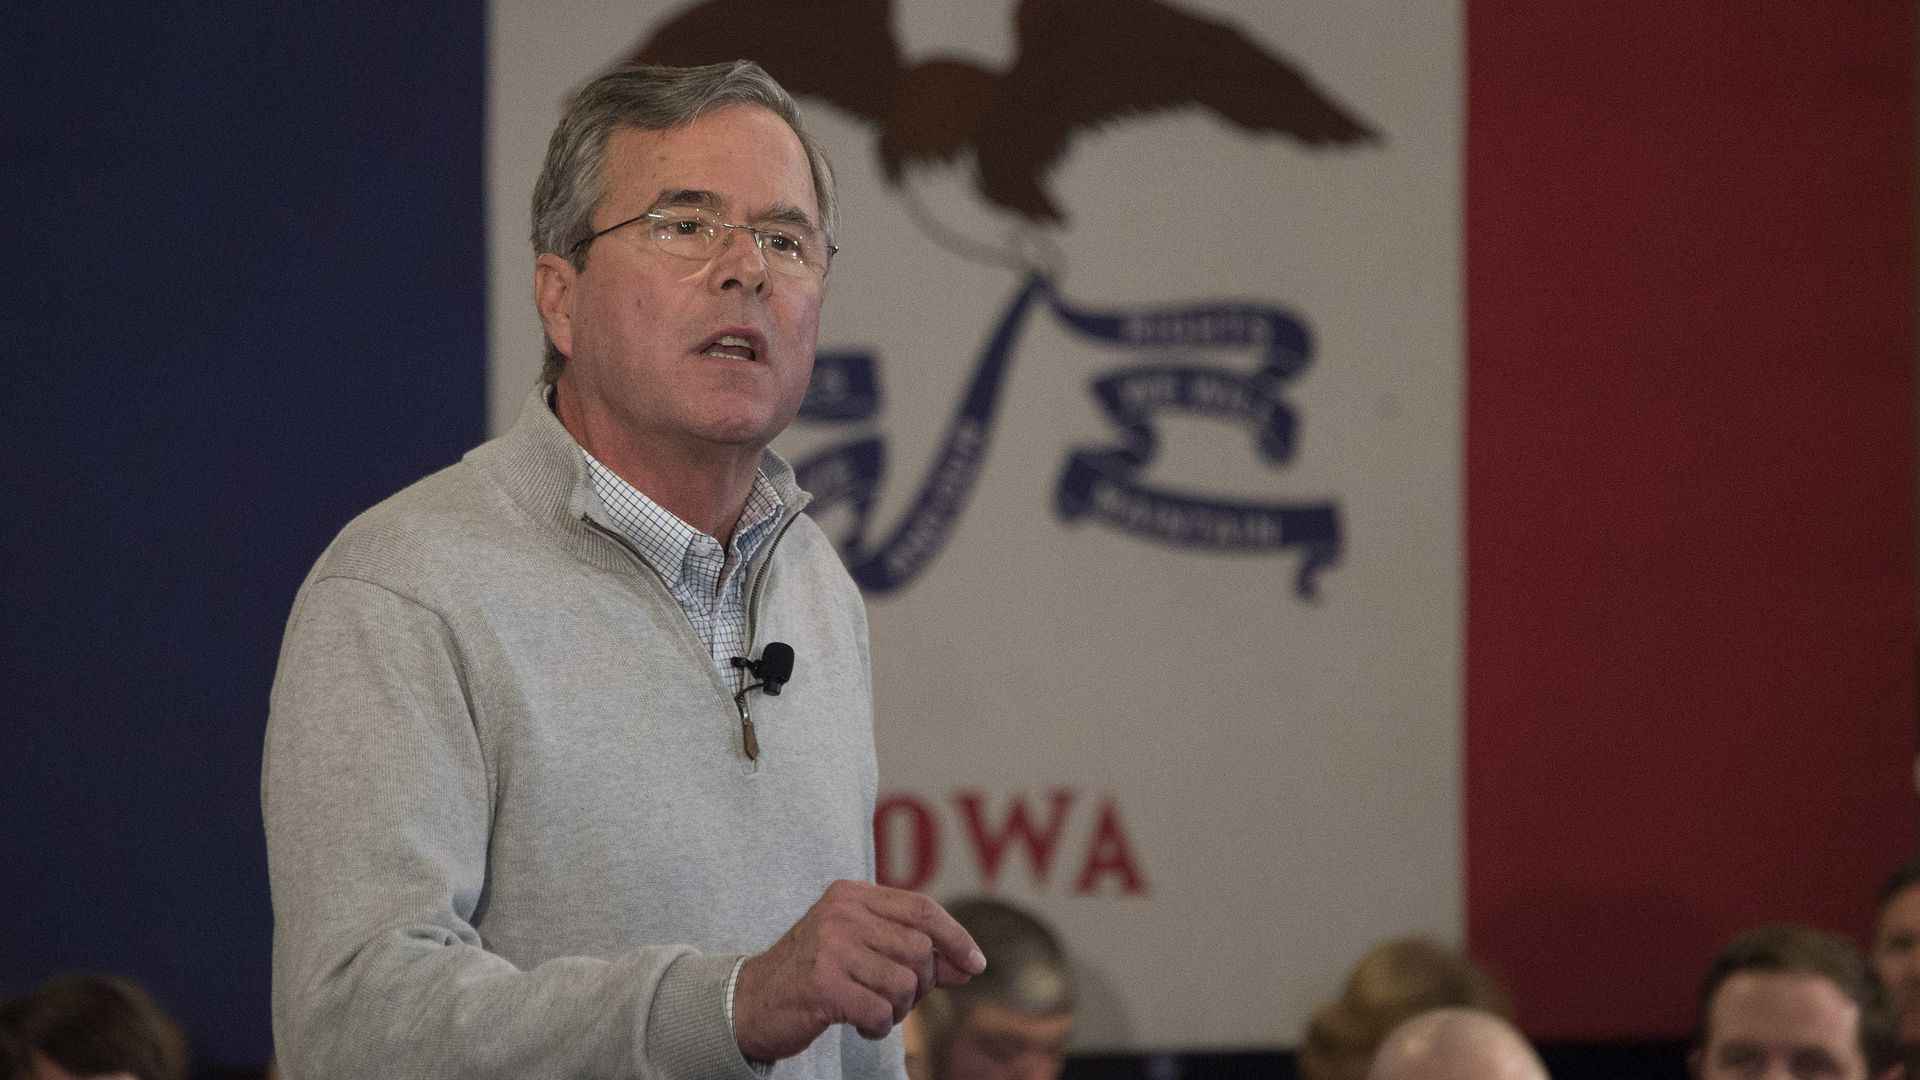 The FEC fined the Jeb Bush super PAC for soliciting a contribution from a foreign national.